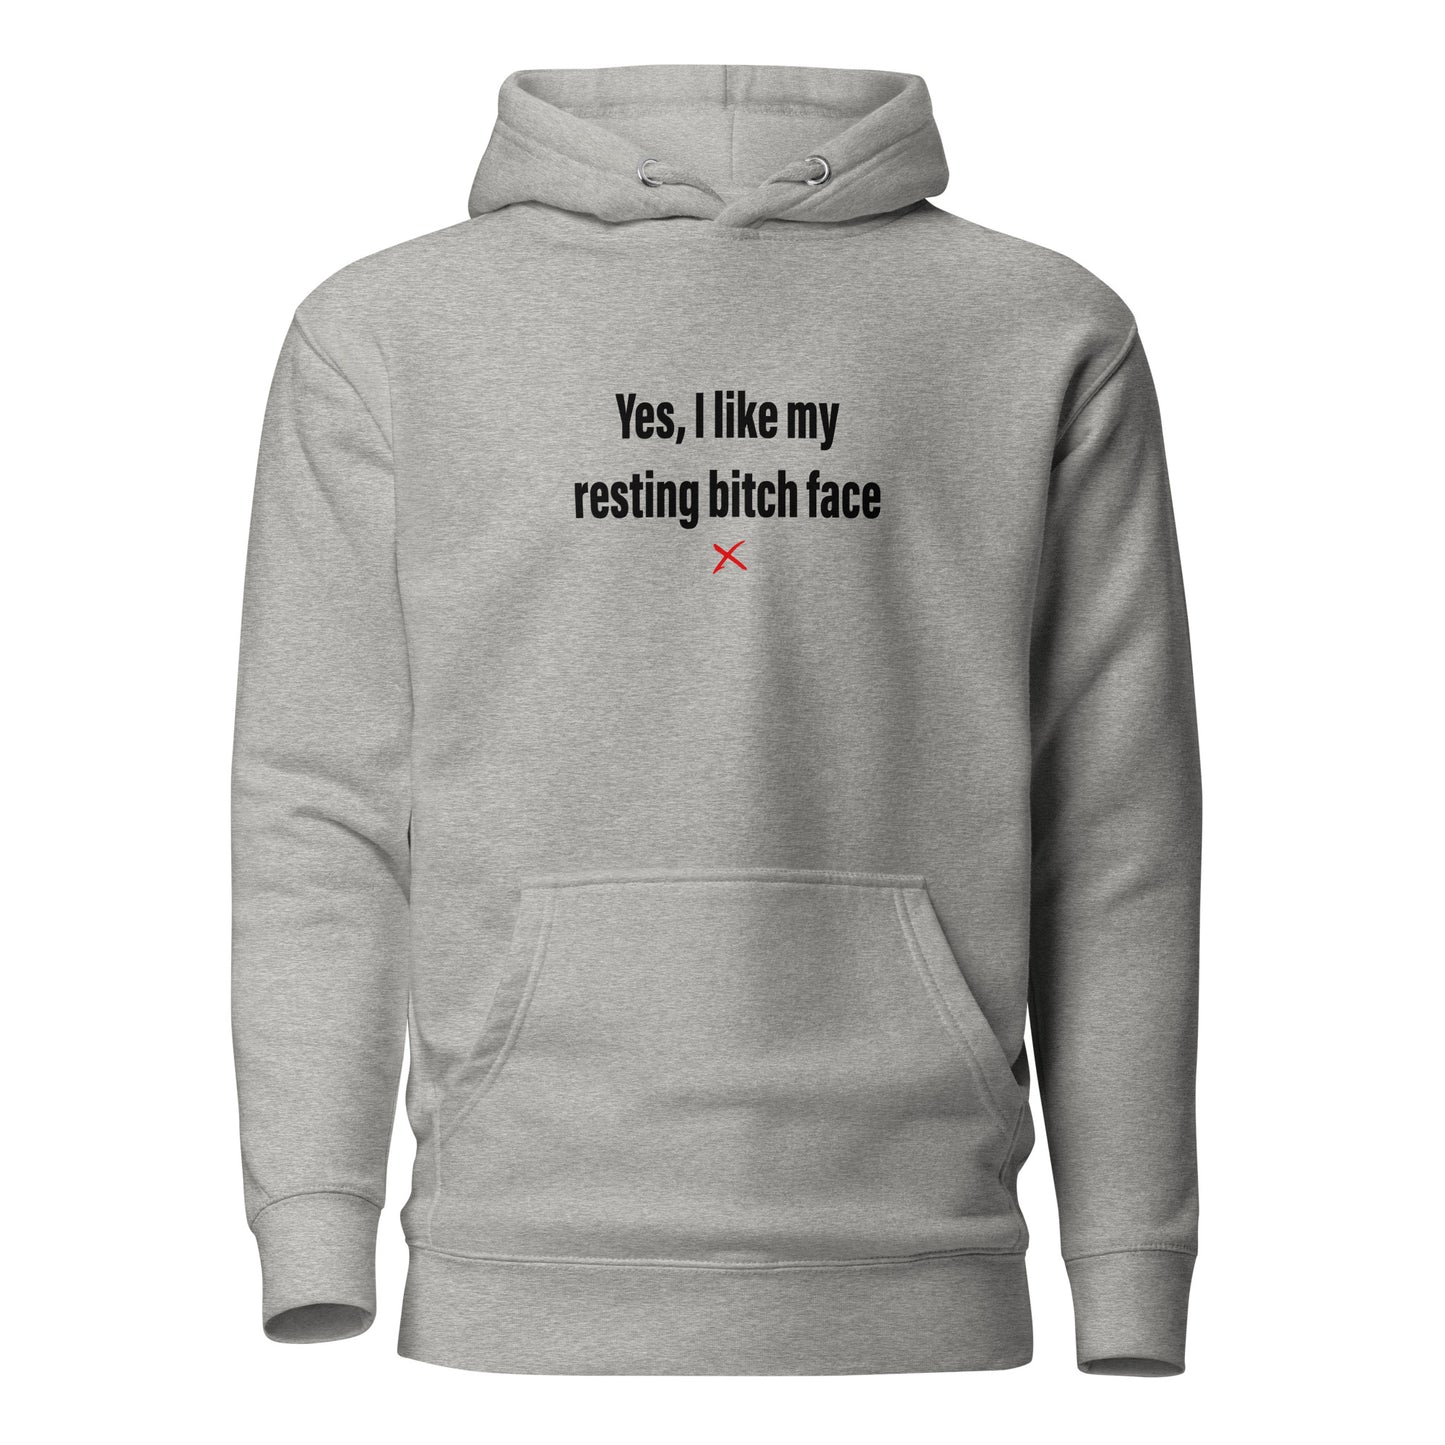 Yes, I like my resting bitch face - Hoodie